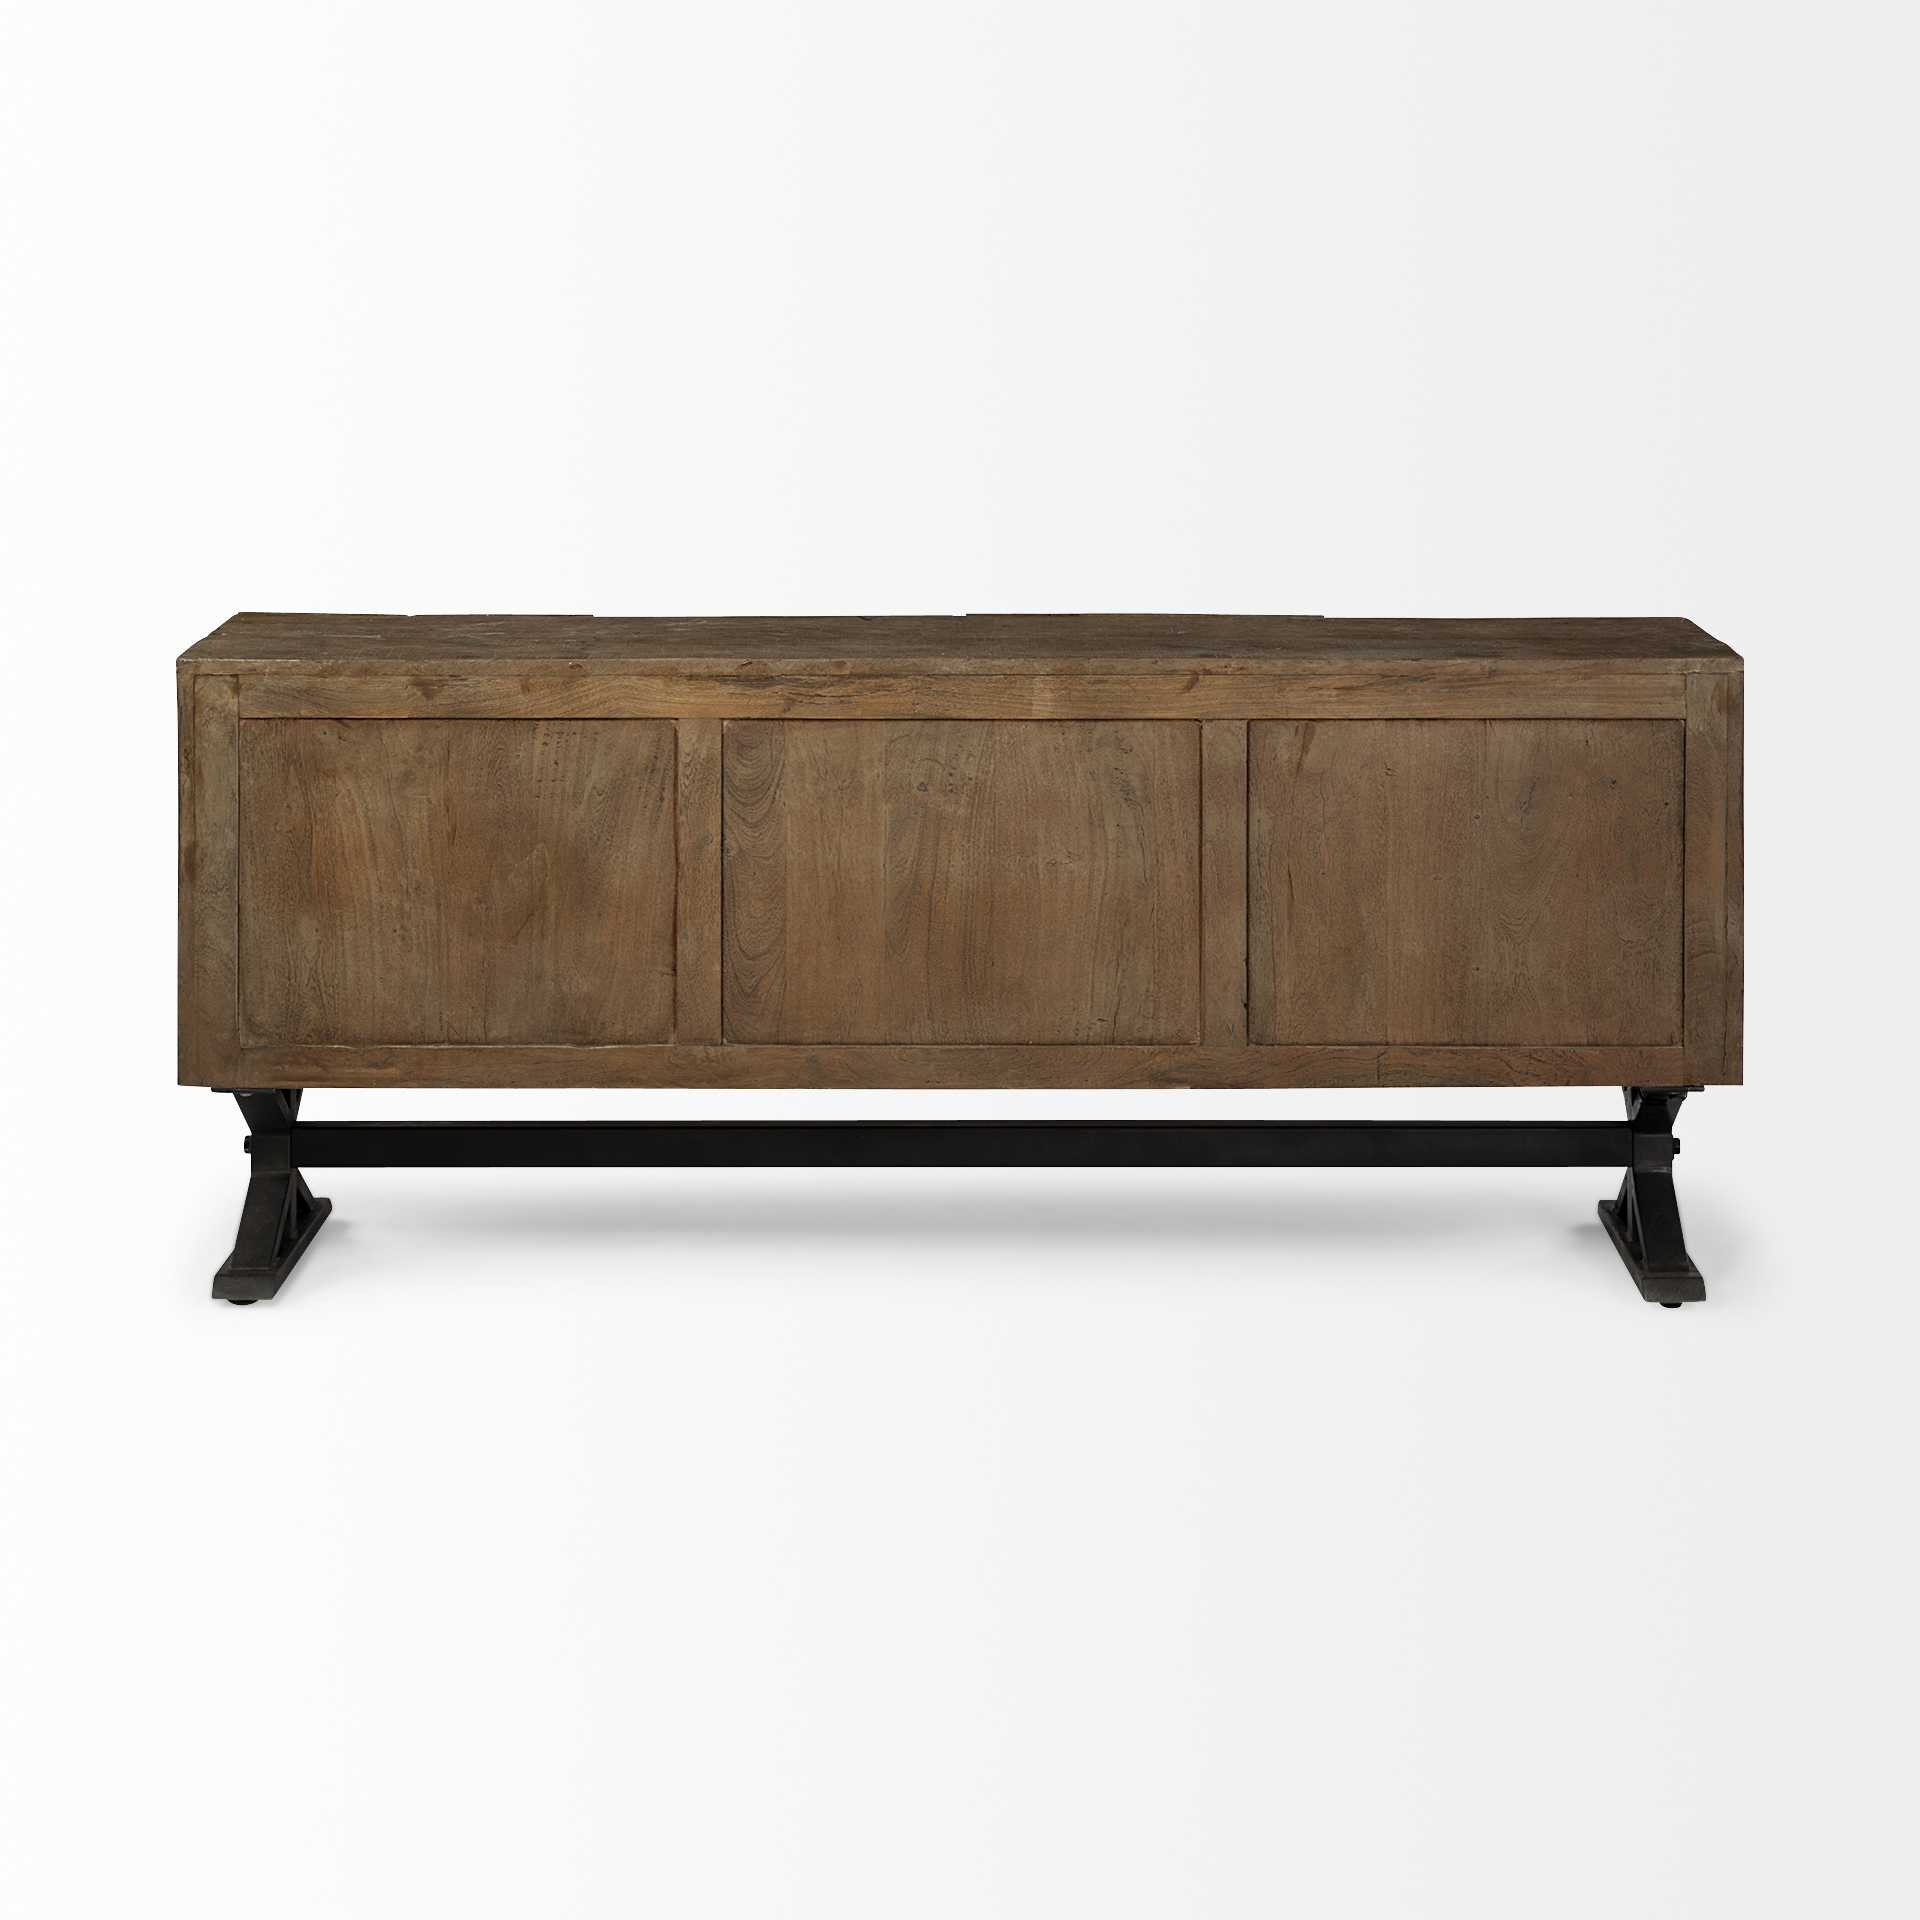 Brown Solid Mango Wood Finish Sideboard With 4 Cabinet Doors